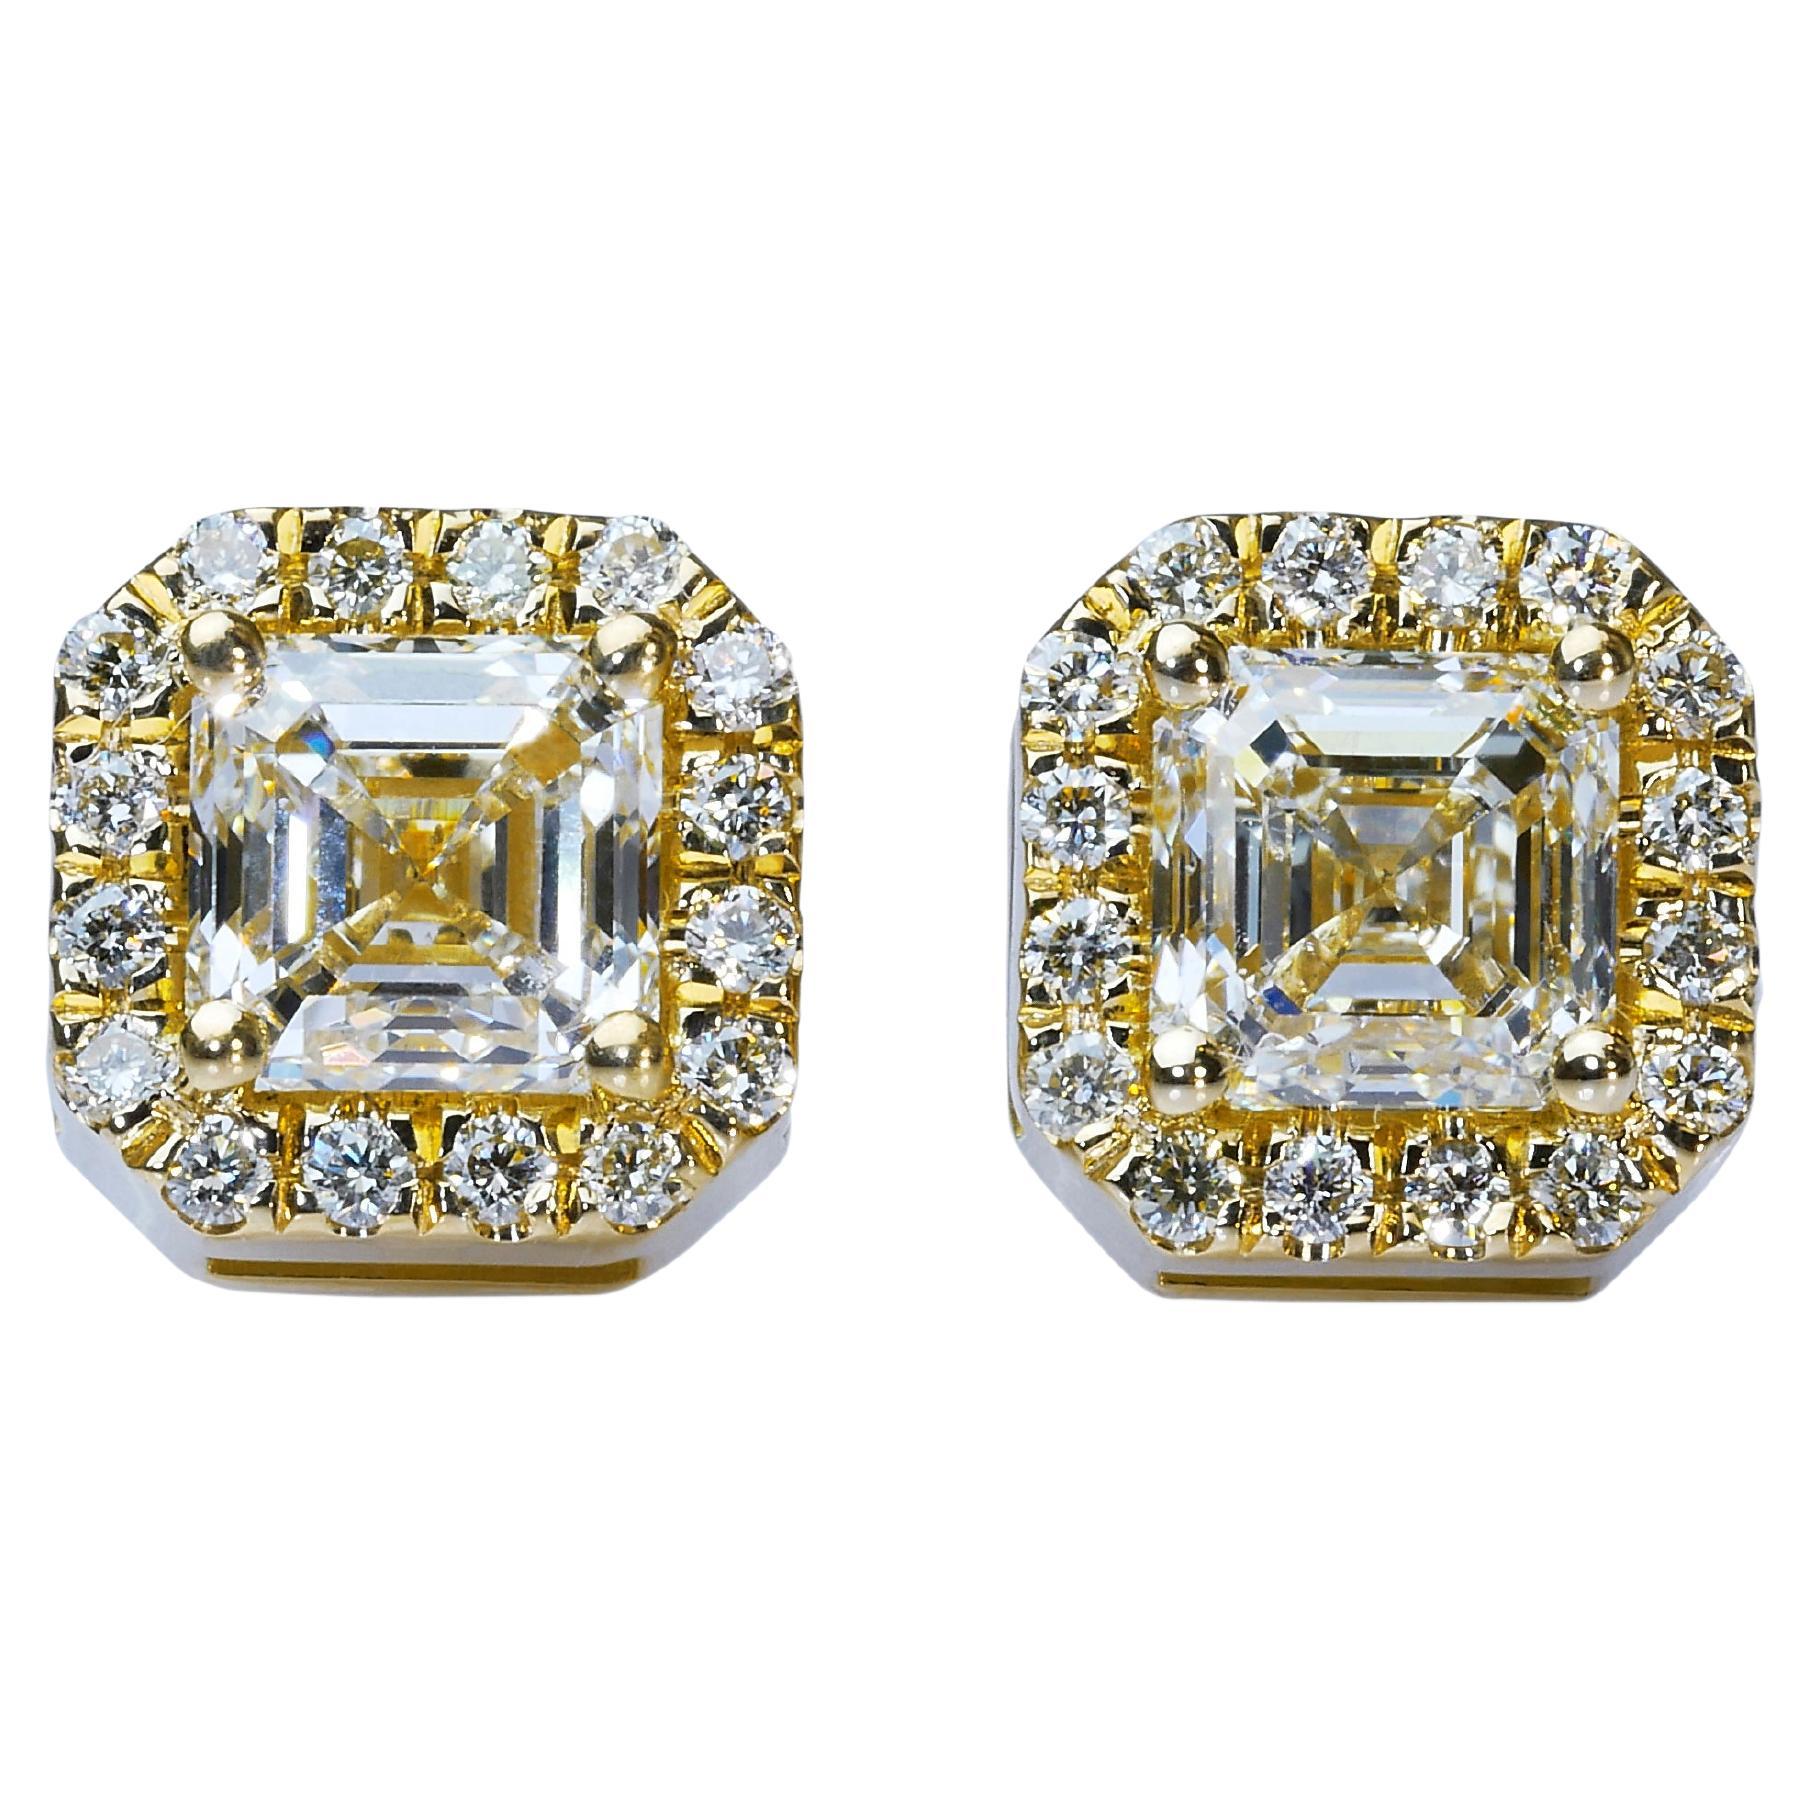 Magnificent 1.74ct Diamond Stud Earrings in 18k Yellow Gold - GIA Certified  For Sale